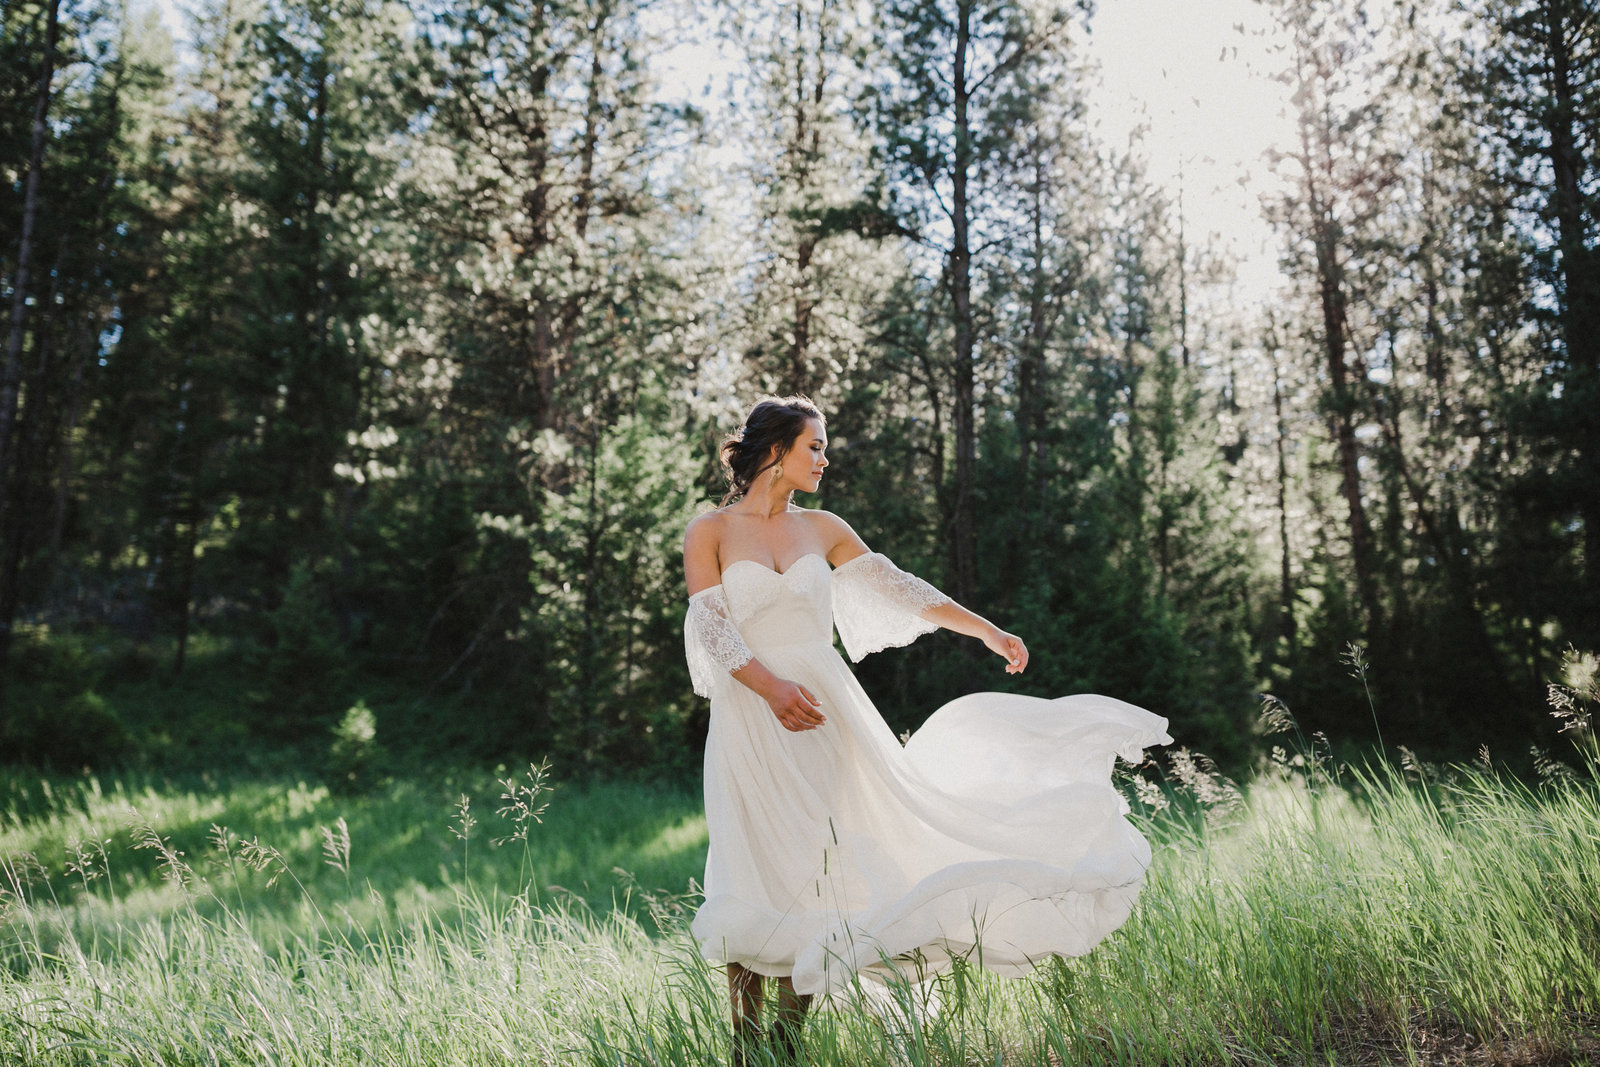 Dreamy indie bride photographed in the woods in Montana for this adventurous elopement wedding.